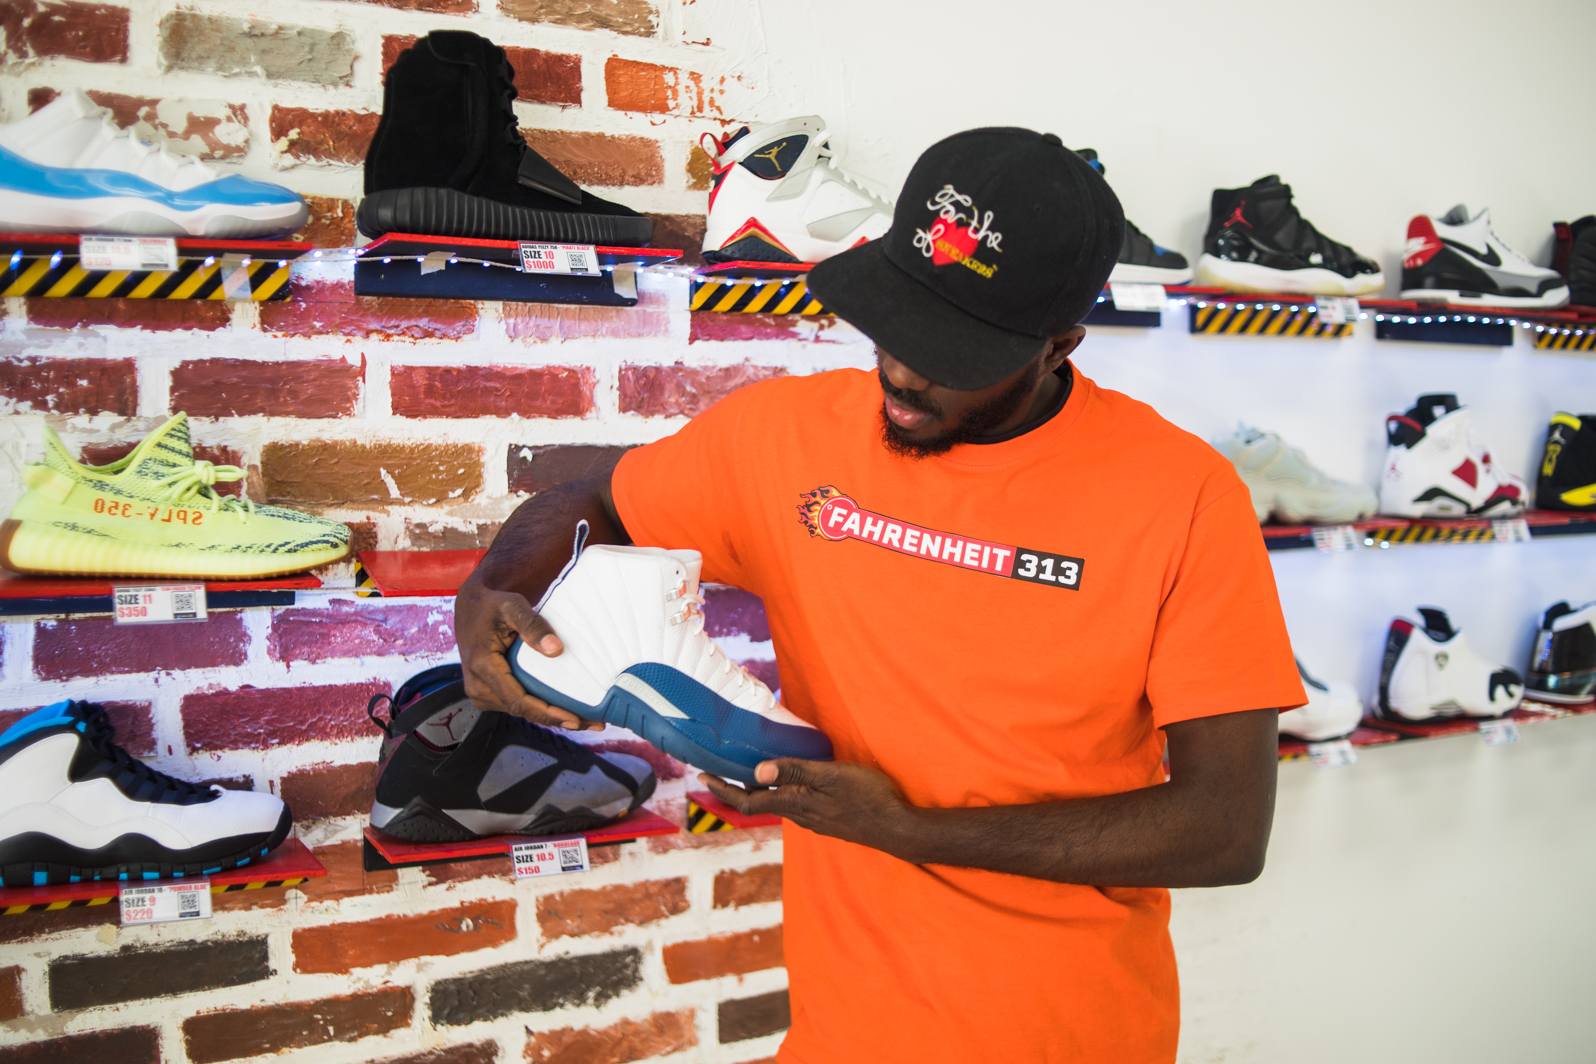 Sneaker trading makes a new home on the Avenue of Fashion